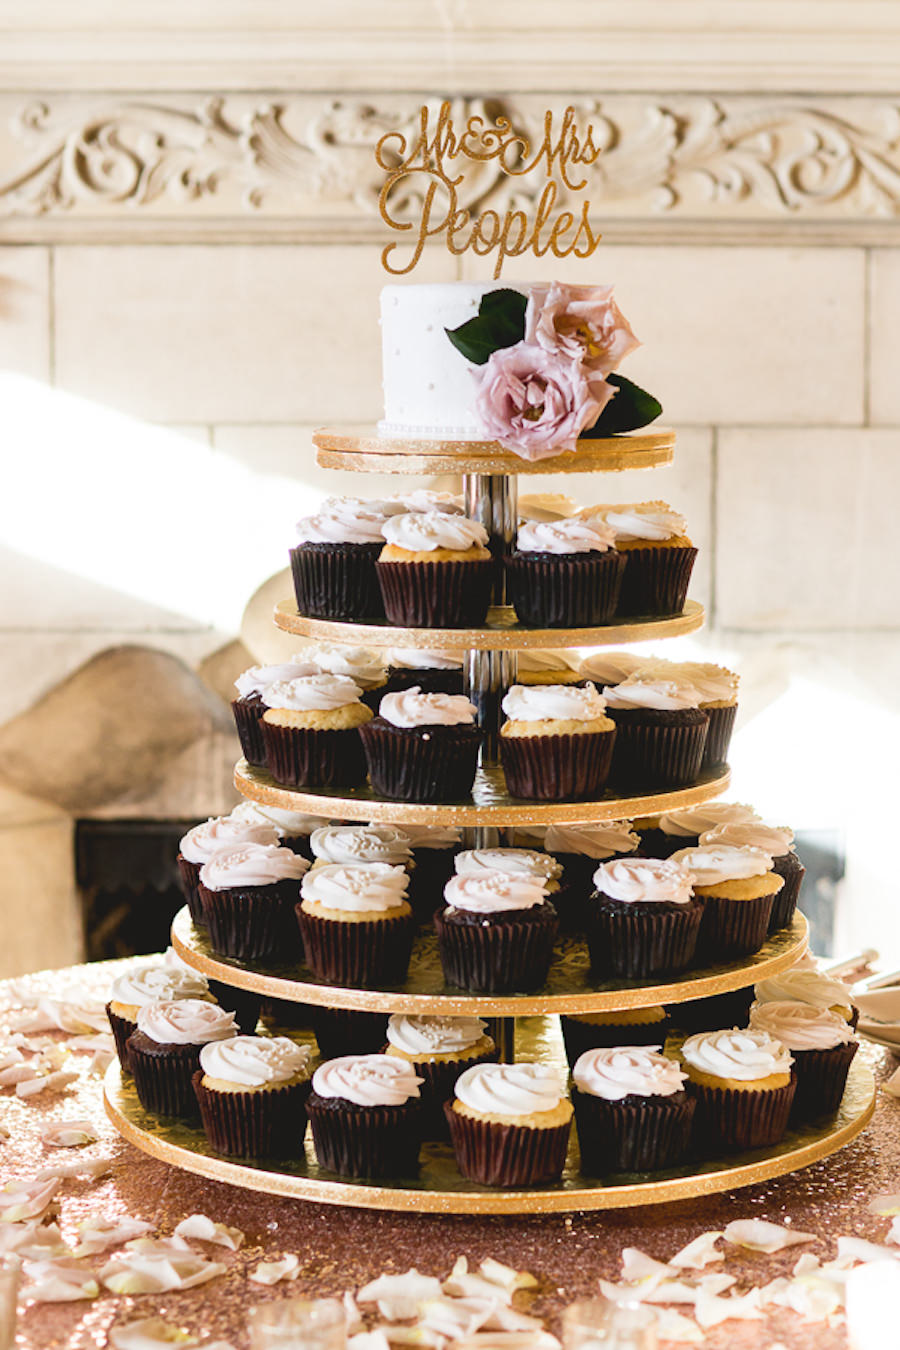 Cupcake Tower with Wedding Cake and Custom Mr./Mrs. Last Name Topper